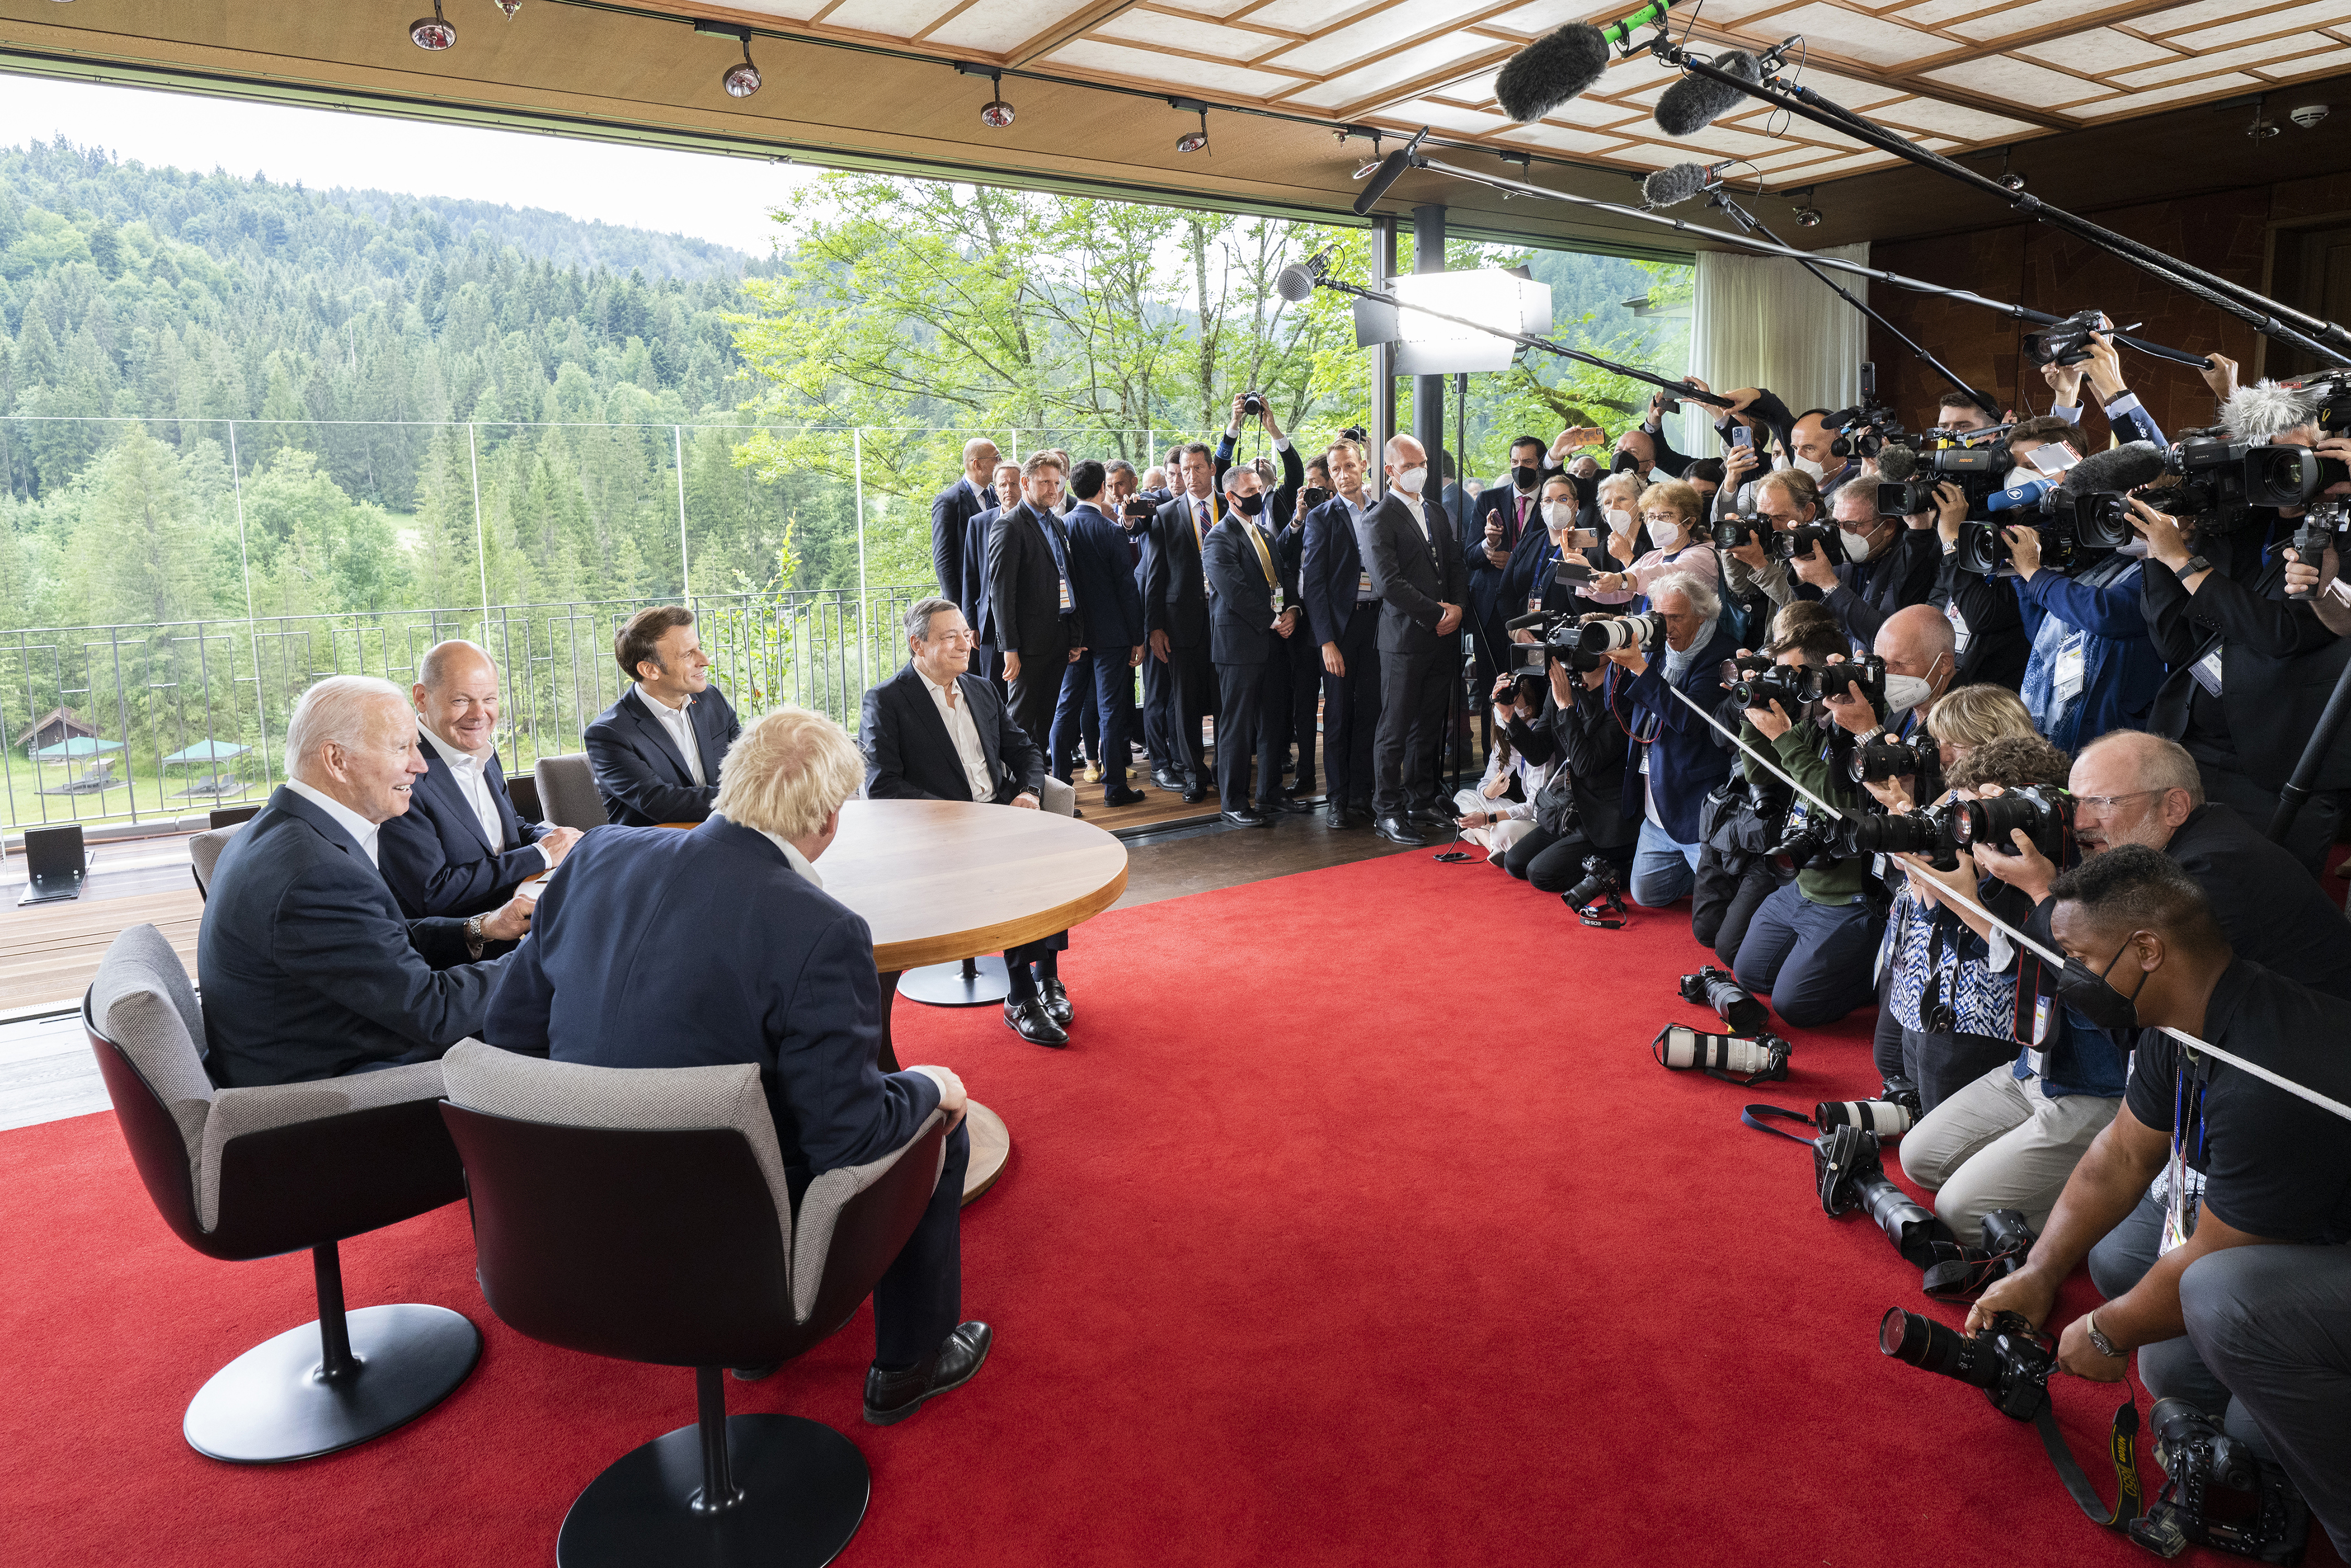 Discussion with British Prime Minister Boris Johnson, US President Joe Biden, Federal Chancellor Olaf Scholz, French President Emmanuel Macron and Italian Prime Minister Mario Draghi before the final working session.